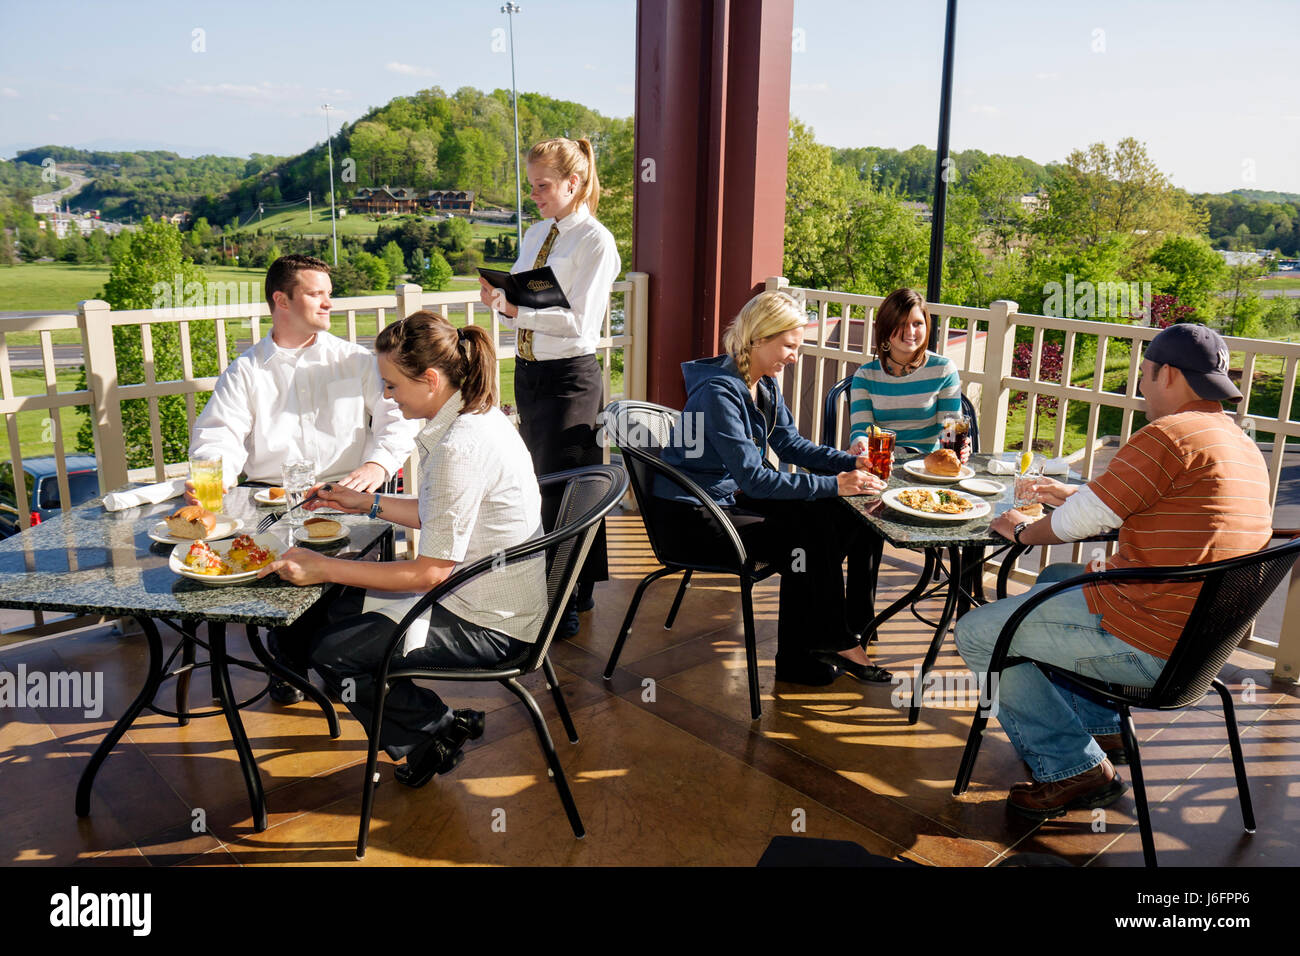 Sevierville Tennessee,Smoky Mountains,Kodak,Chop house,houses,restaurant restaurants food dining cafe cafes,man men male adult adults,men,woman female Stock Photo